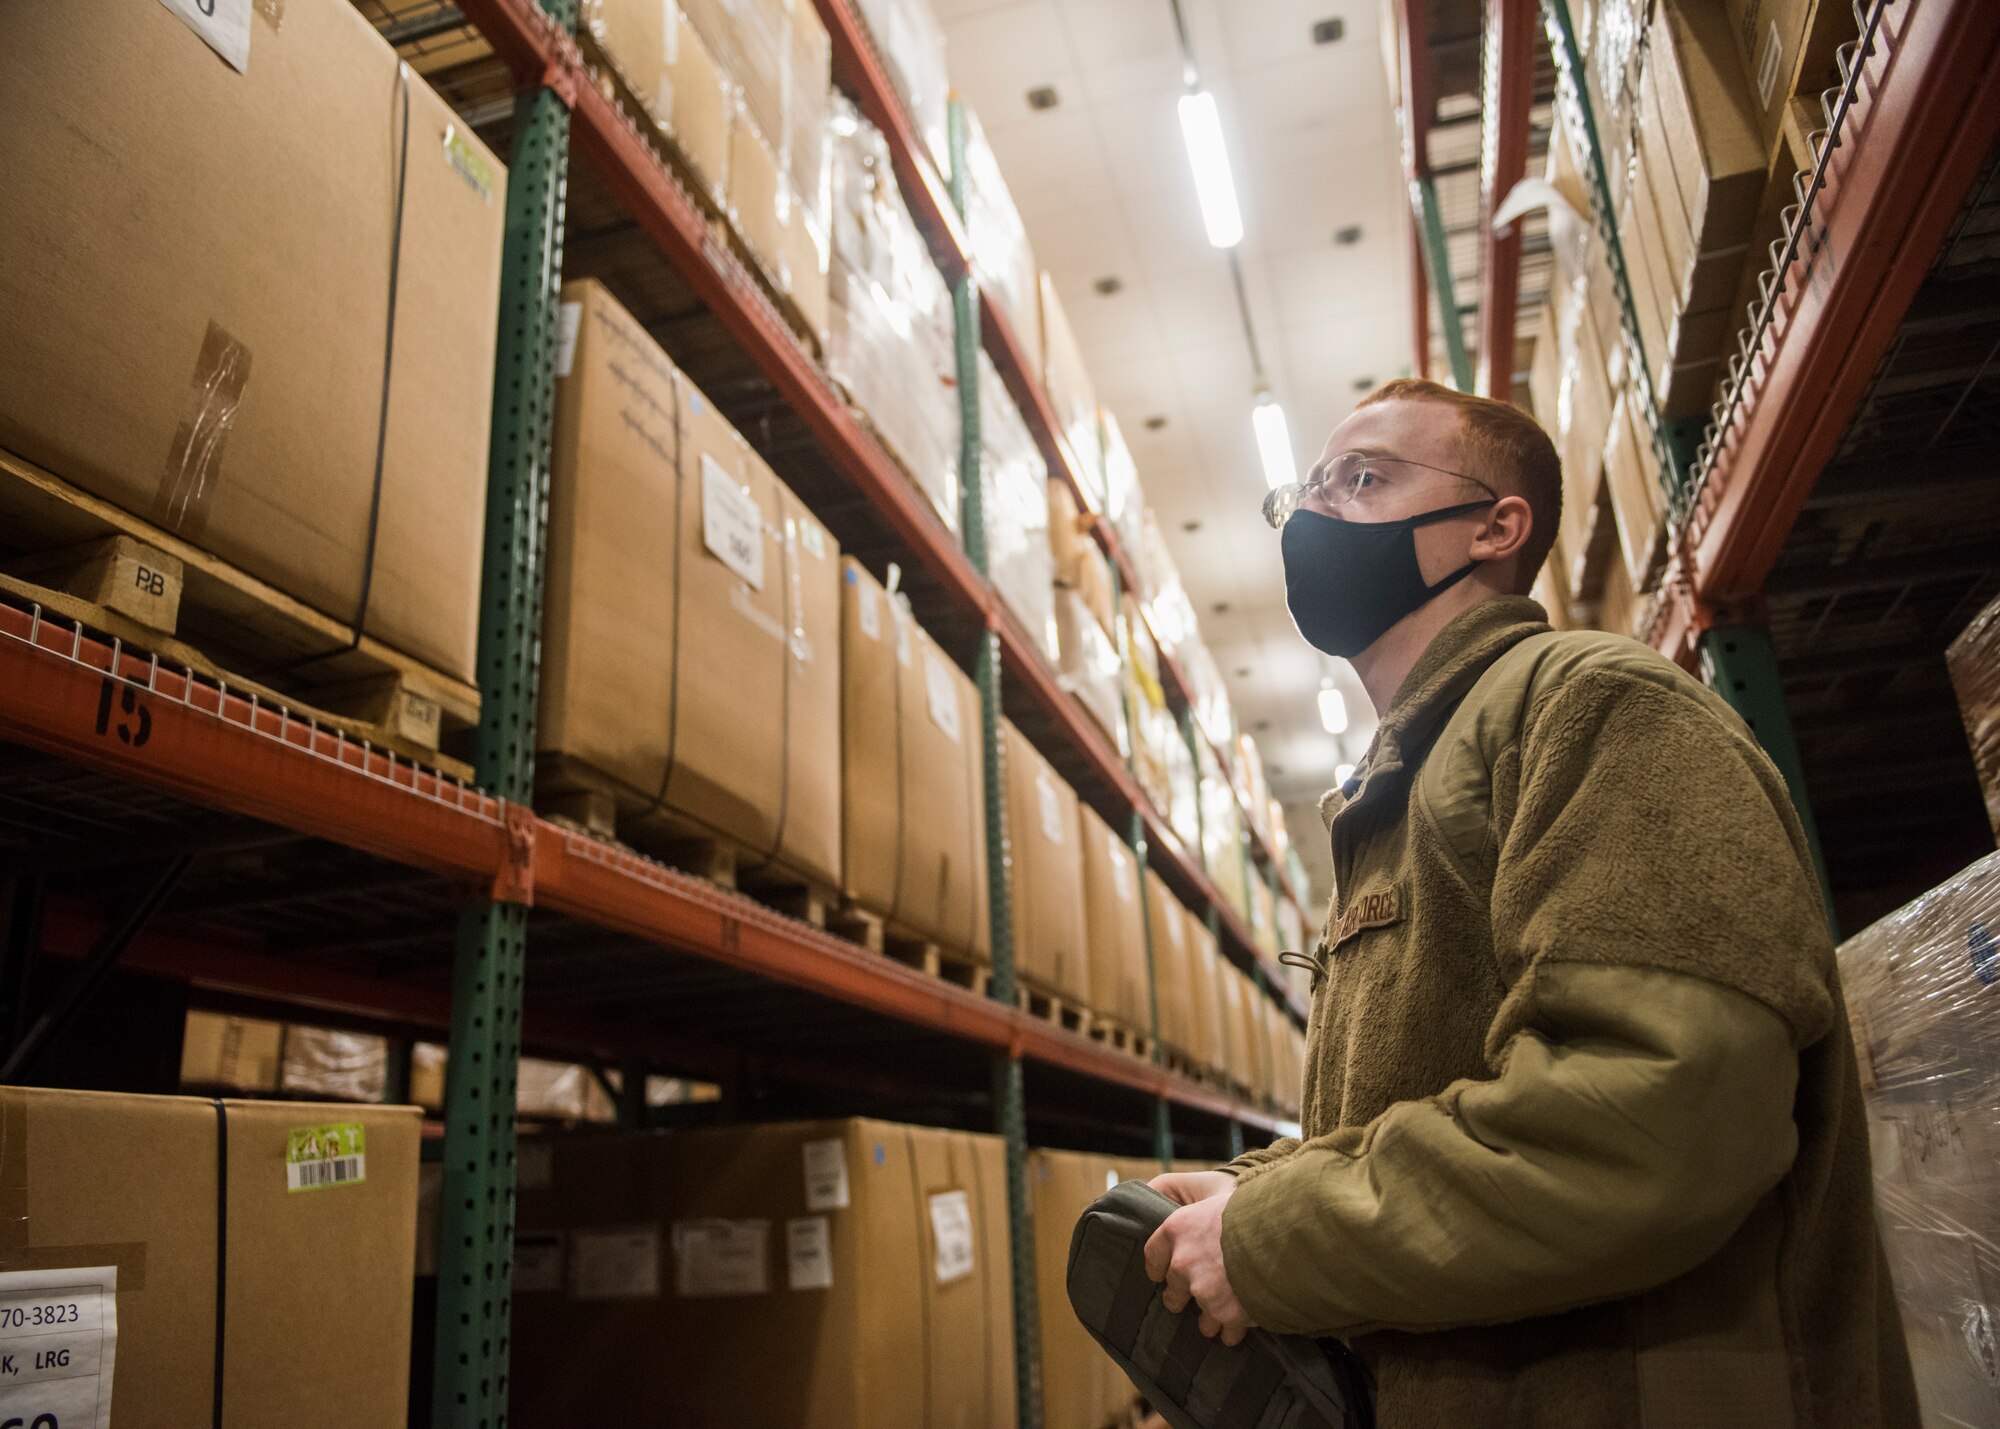 Man in uniform looking at boxes in a warehouse